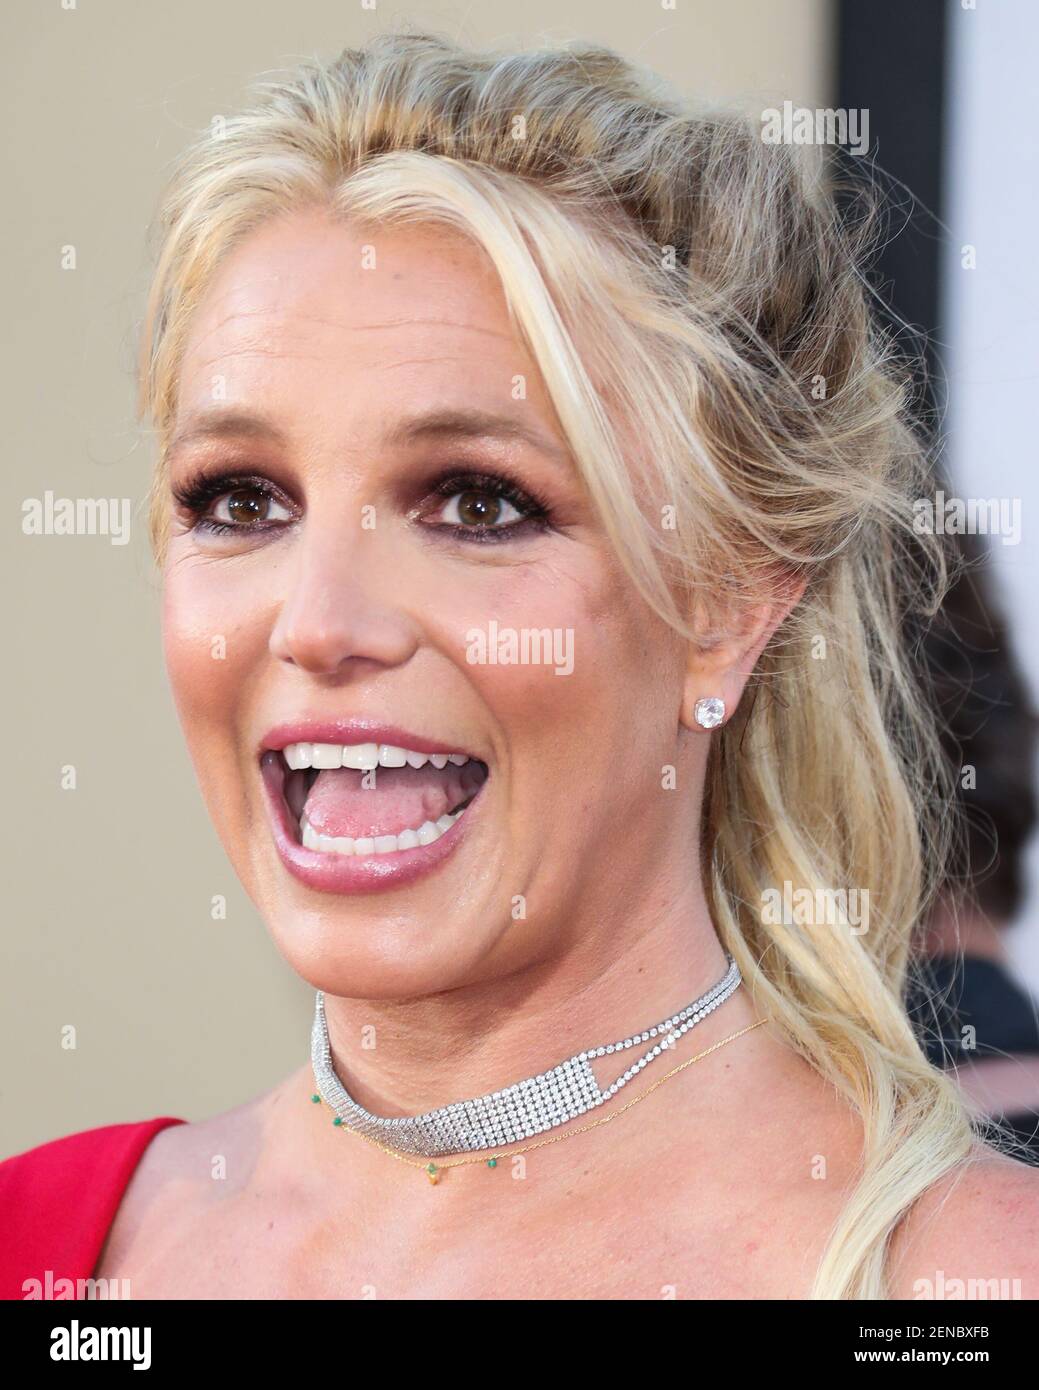 HOLLYWOOD, LOS ANGELES, CALIFORNIA, USA - JULY 22: Singer Britney Spears  wearing a Nookie dress arrives at the World Premiere Of Sony Pictures'  'Once Upon a Time In Hollywood' held at the